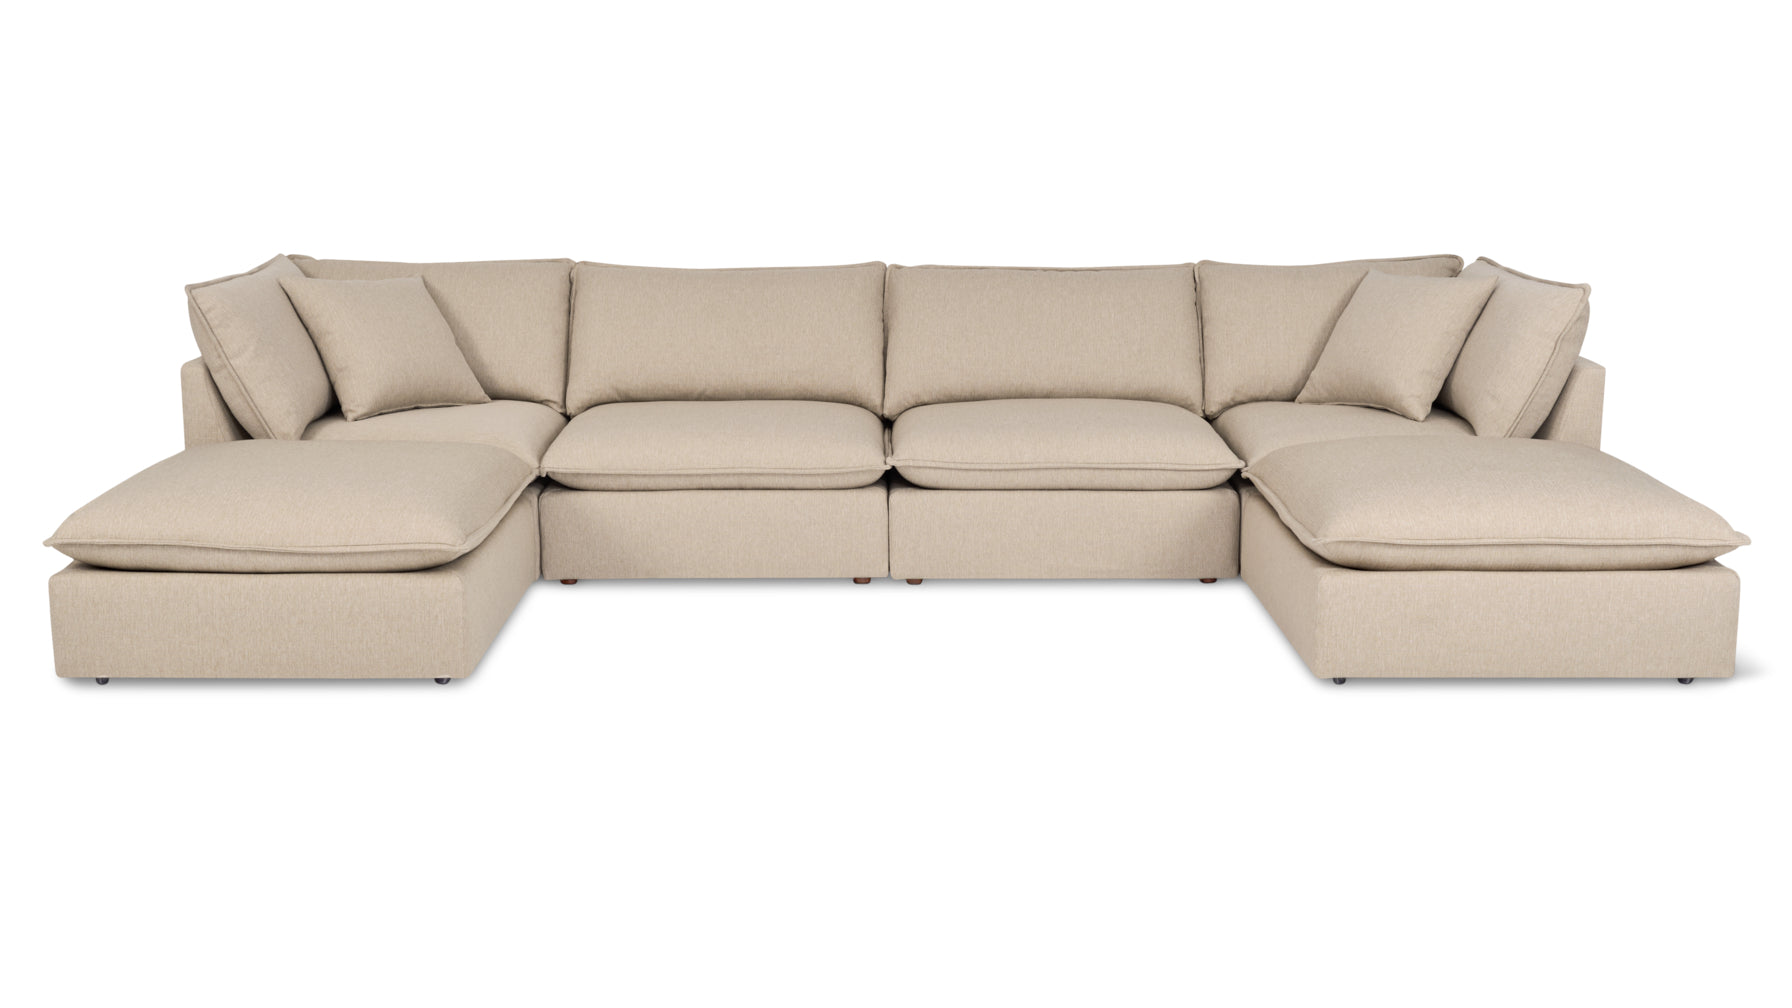 Chill Time 6-Piece Modular U-Shaped Sectional, Biscuit - Image 1